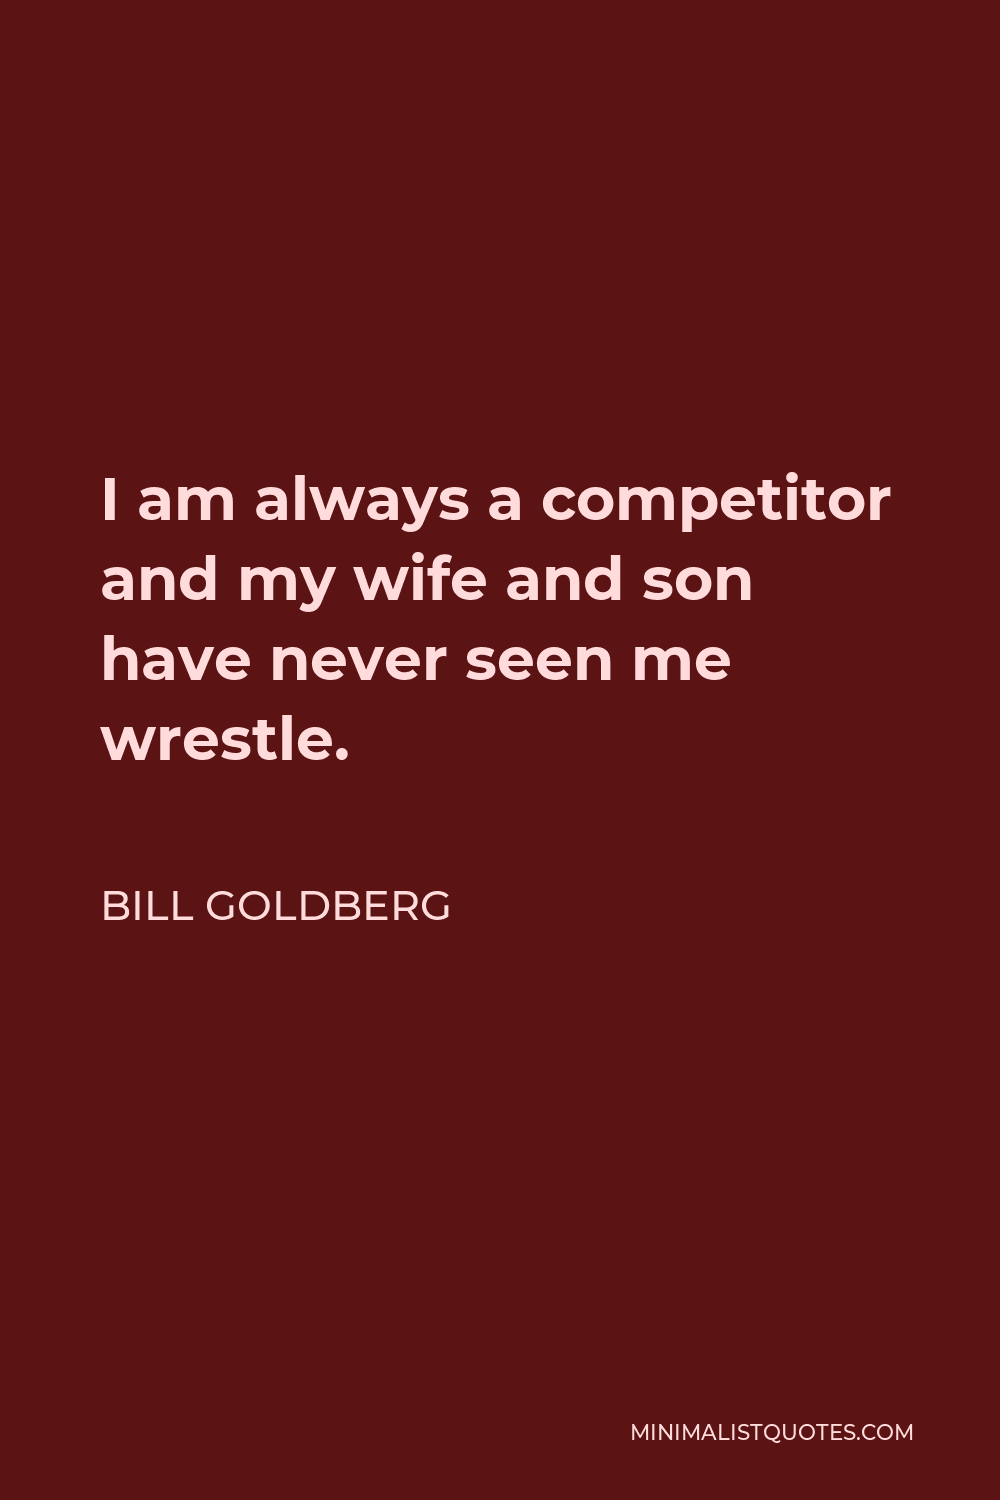 Bill Goldberg Quote - I am always a competitor and my wife and son have never seen me wrestle.